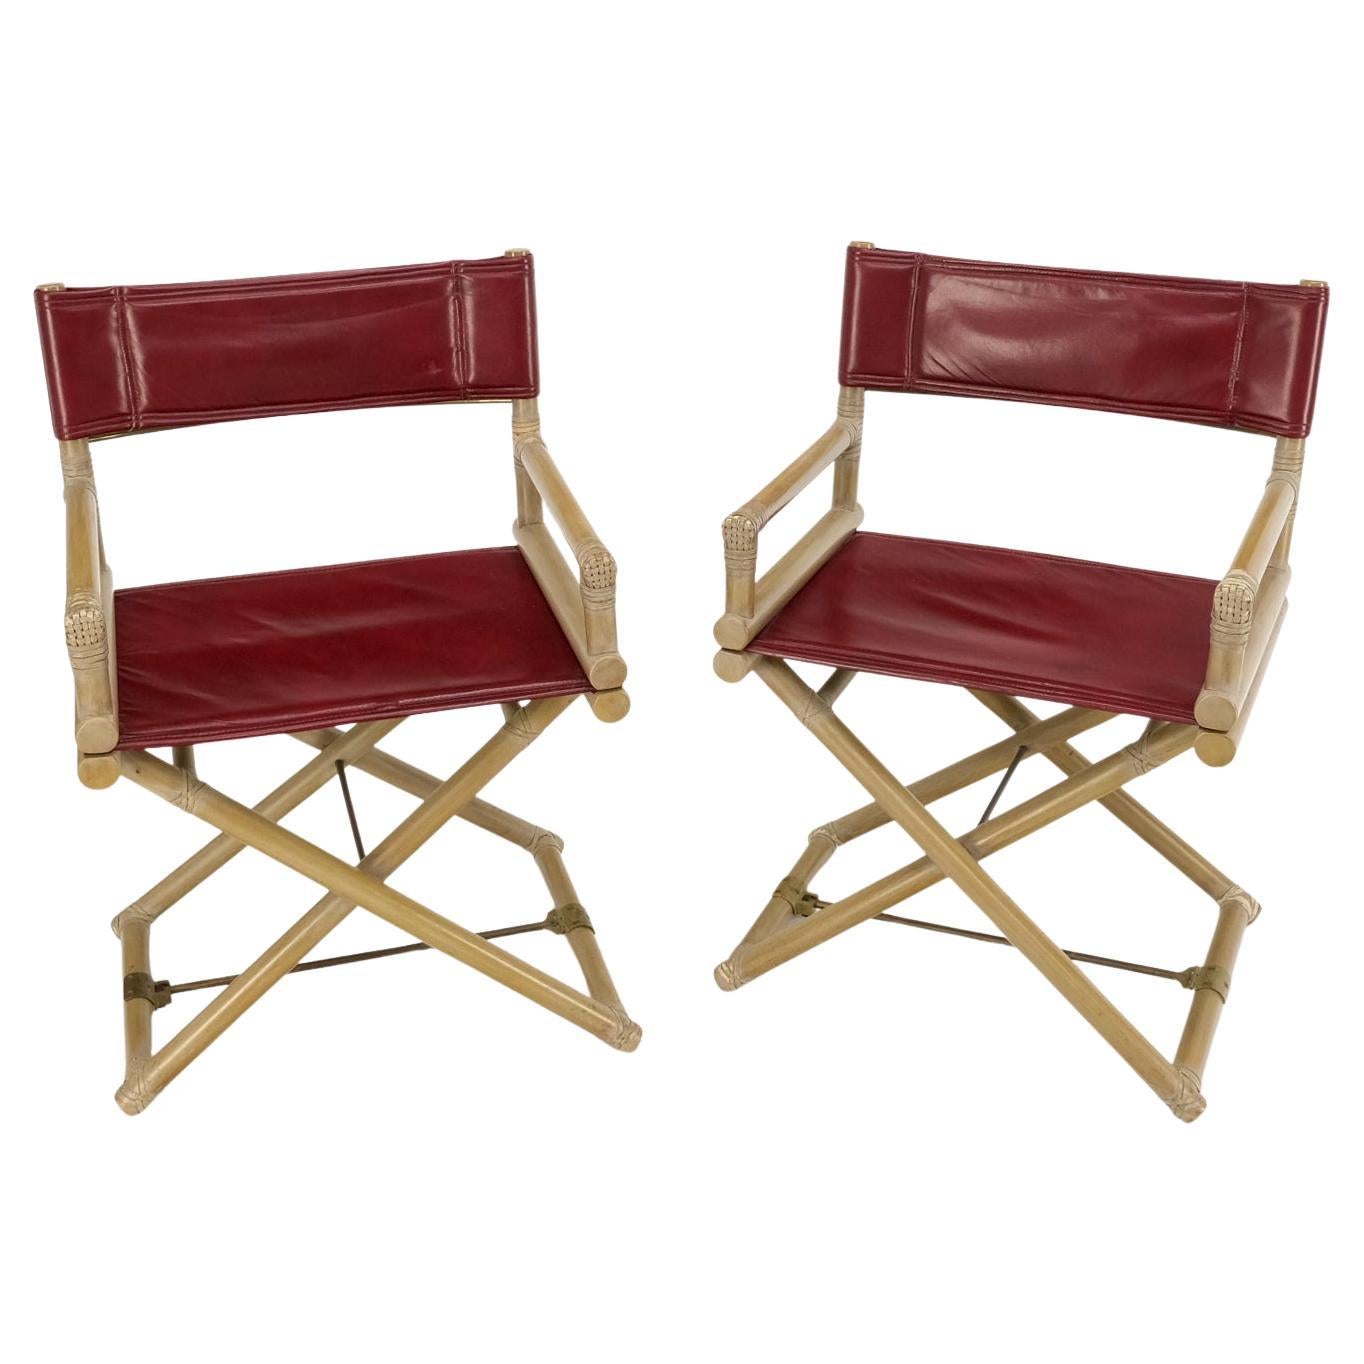 Pair McGuire Burgundy Leather Sling Seats Folding Captains Chairs Olive Frames 